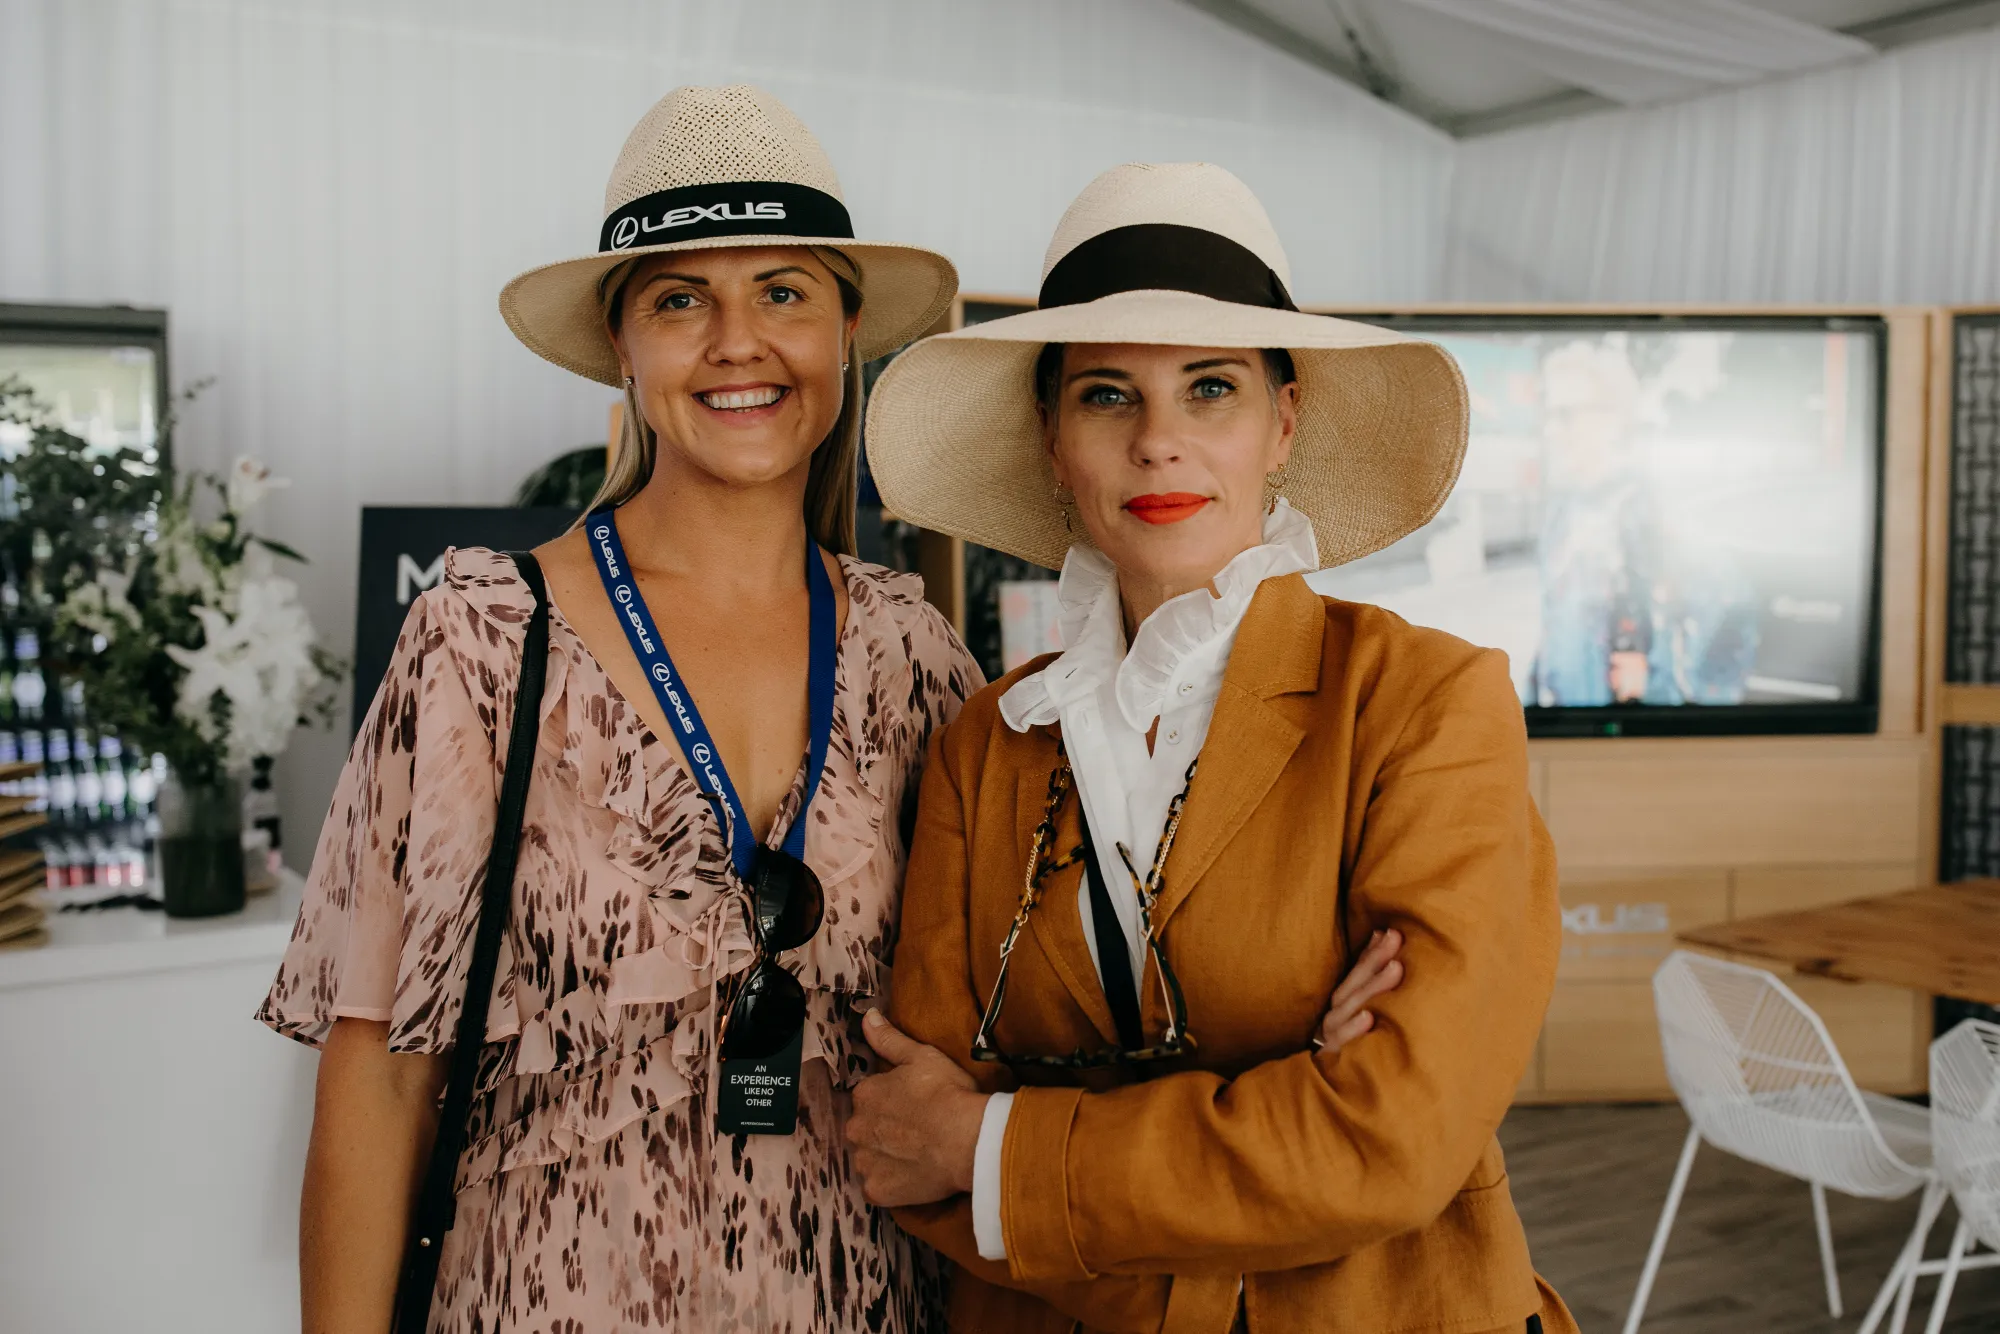 Karen Walker and guest at Lexus Urban Polo, photo by Sarah Weber Photography